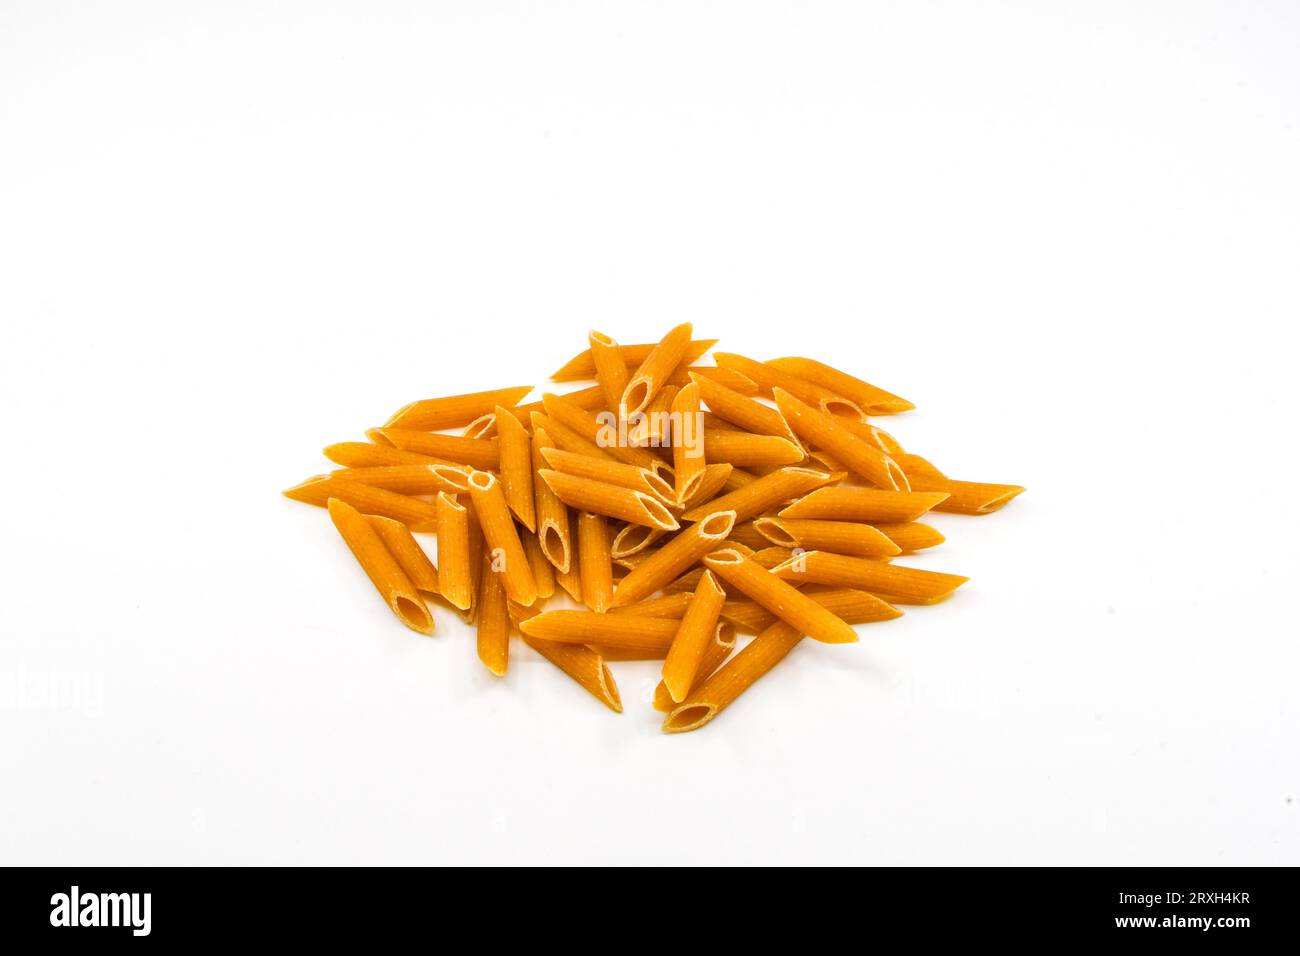 Heap of dried wholemeal penne pasta tubes isolated on a plain white background. Copy space. Stock Photo